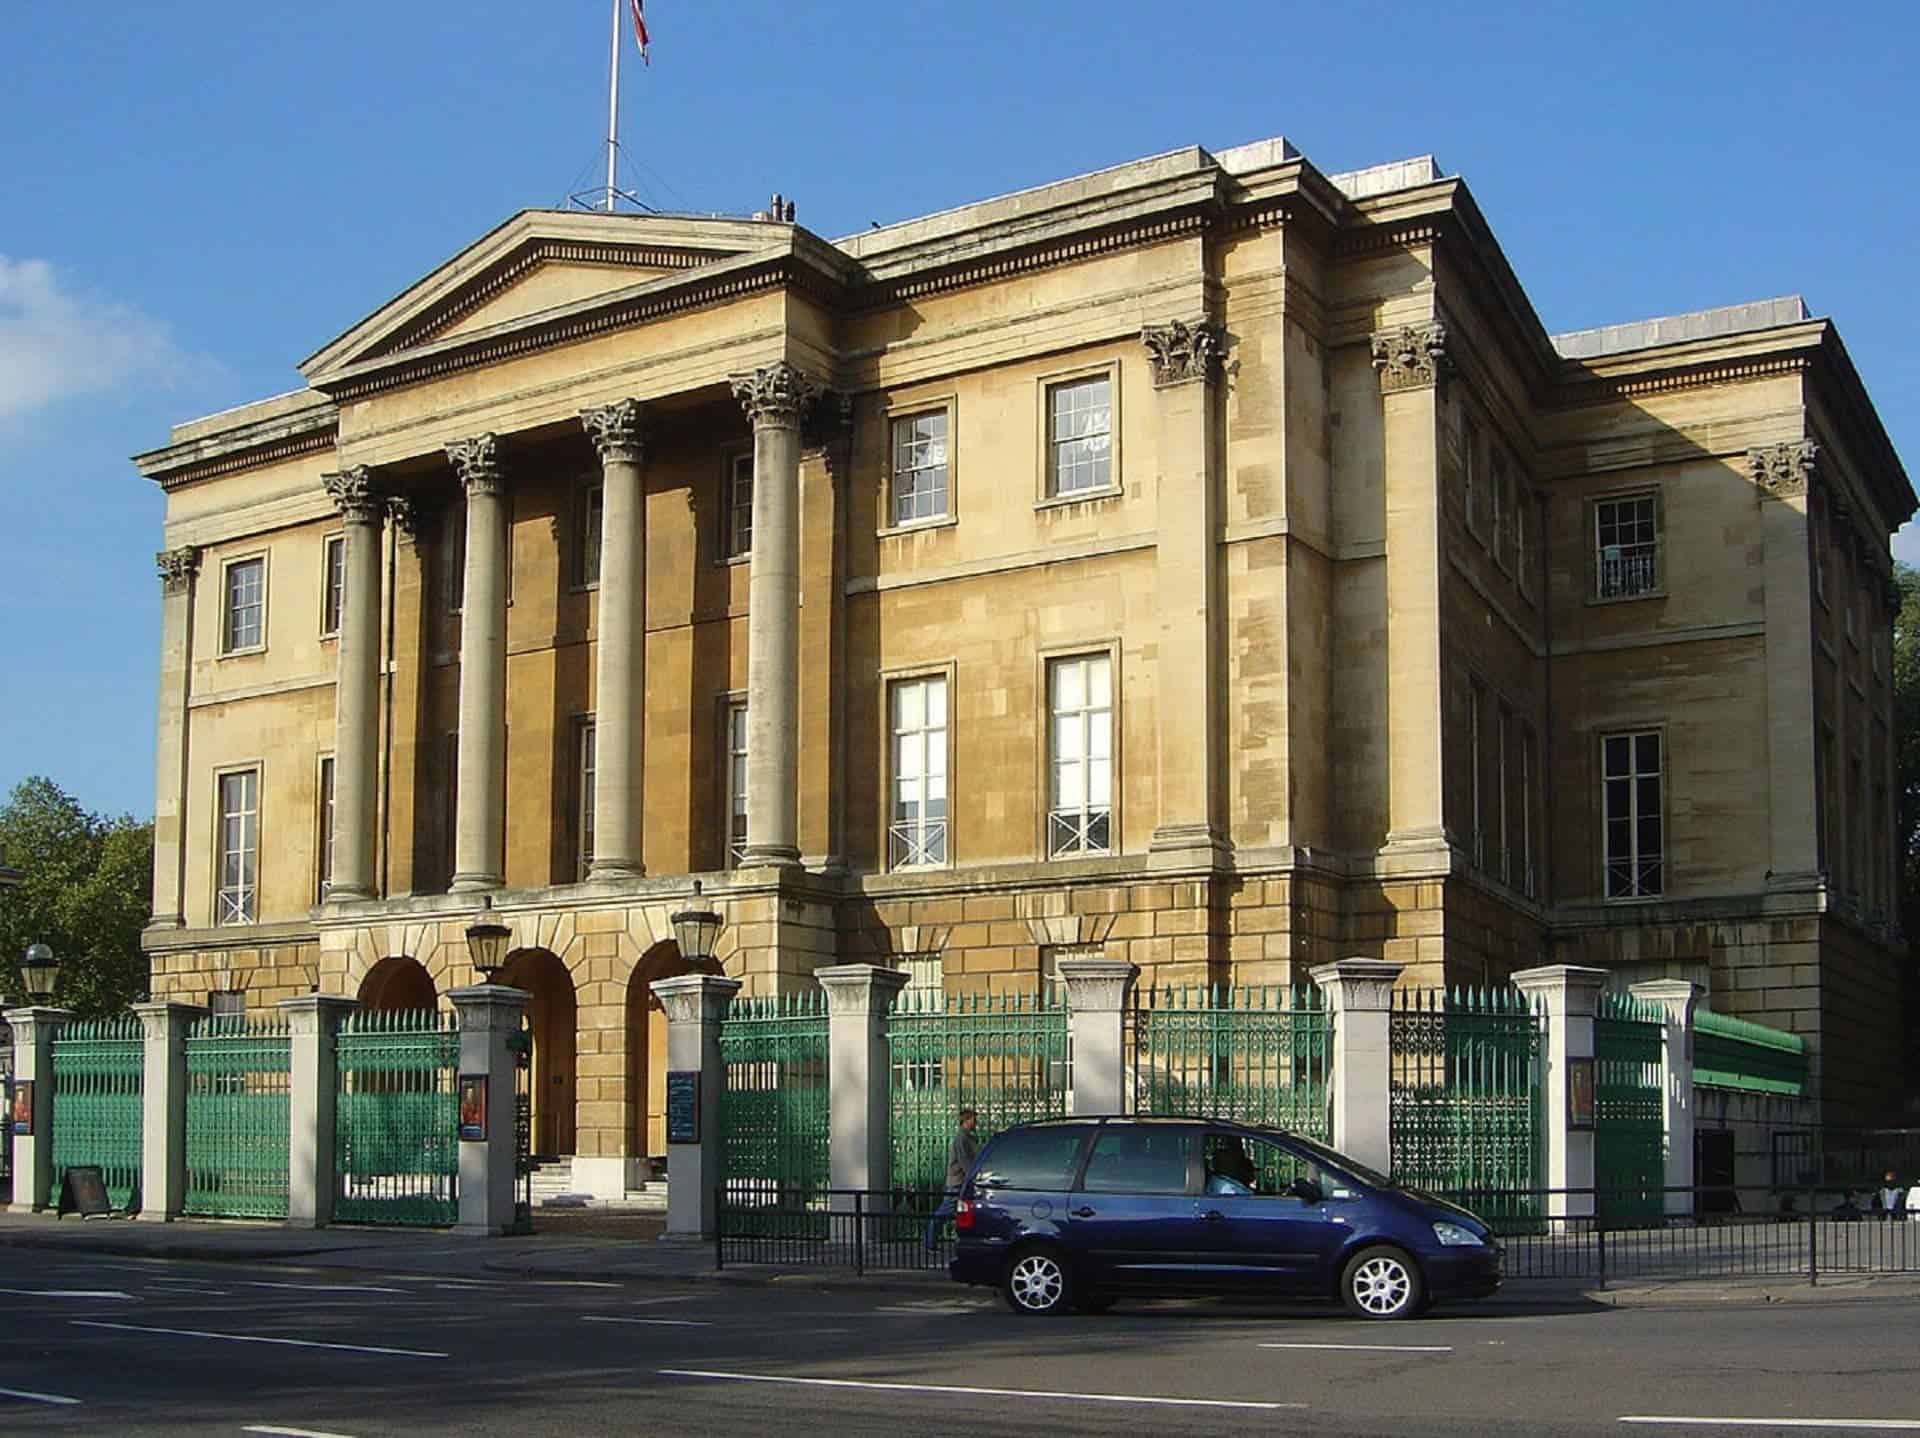 Apsley House in UK